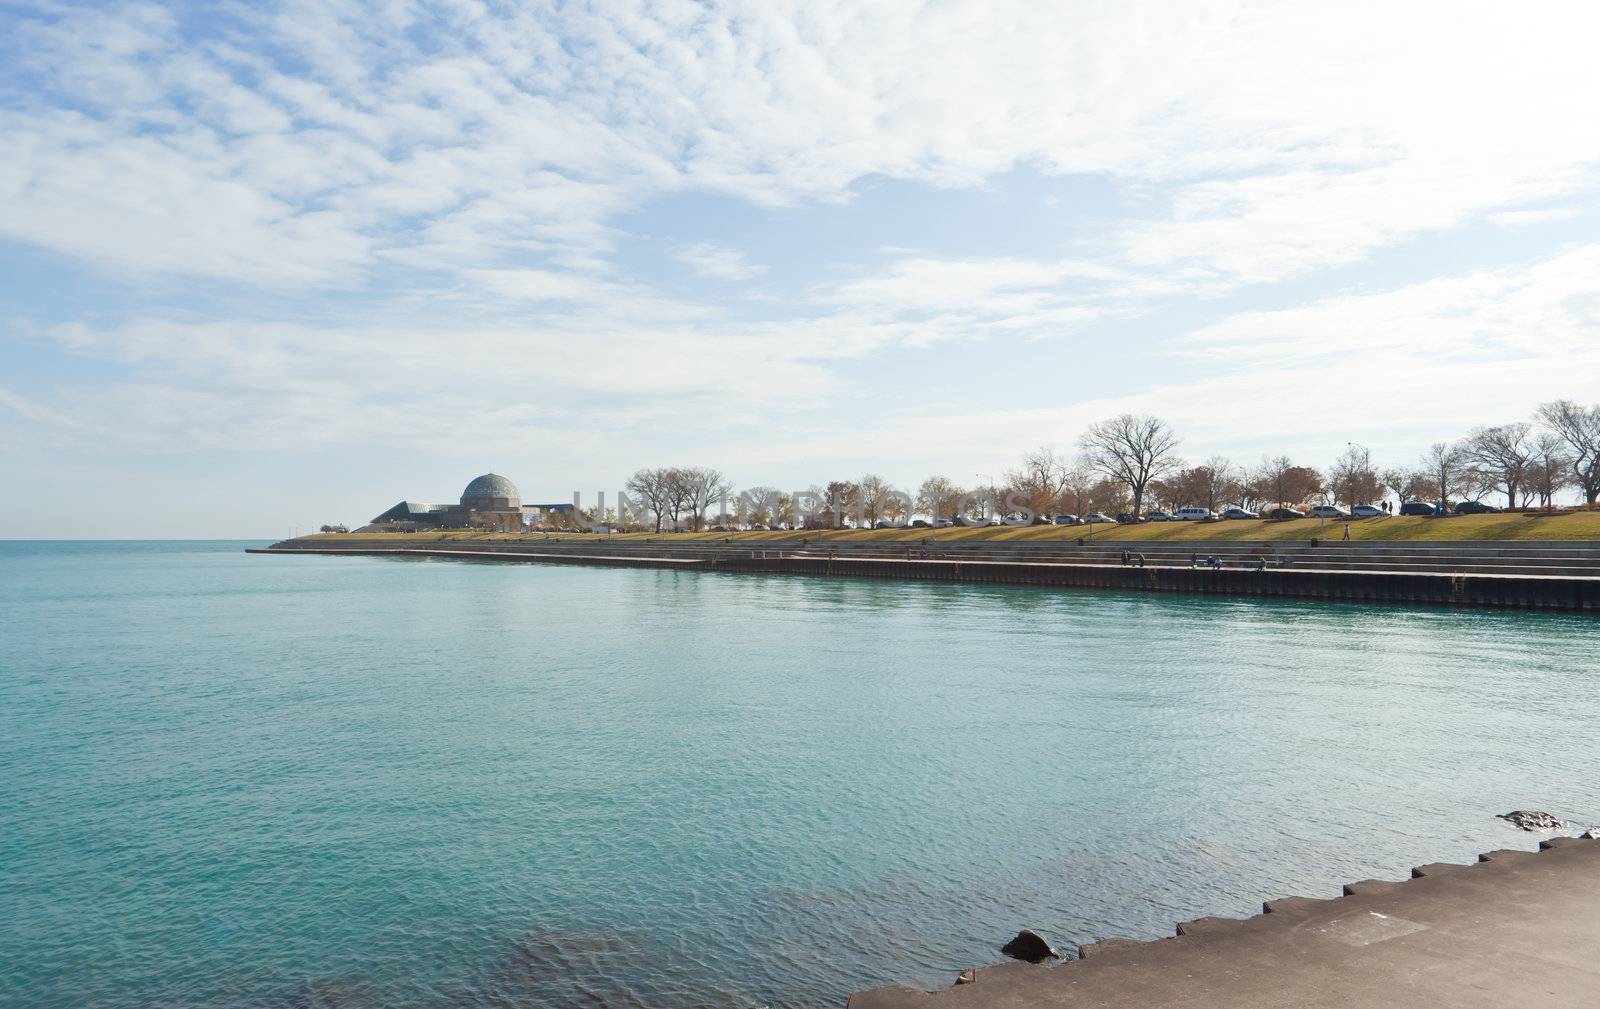 The Michigan lake shore in Chicago by gary718